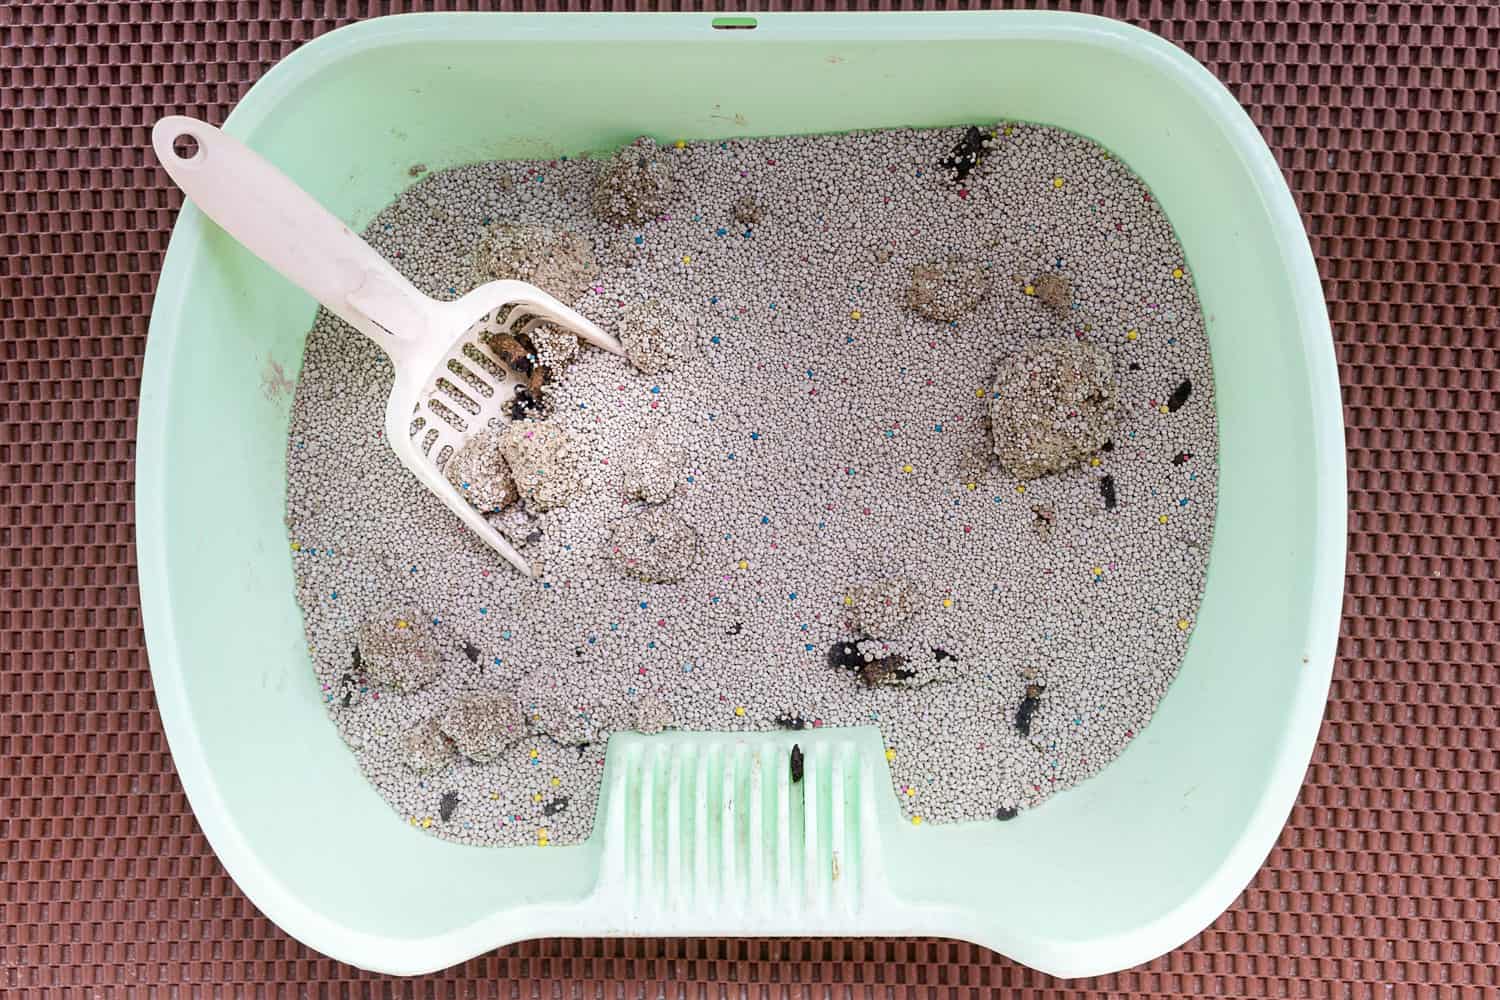 Top view of a dirty litter box